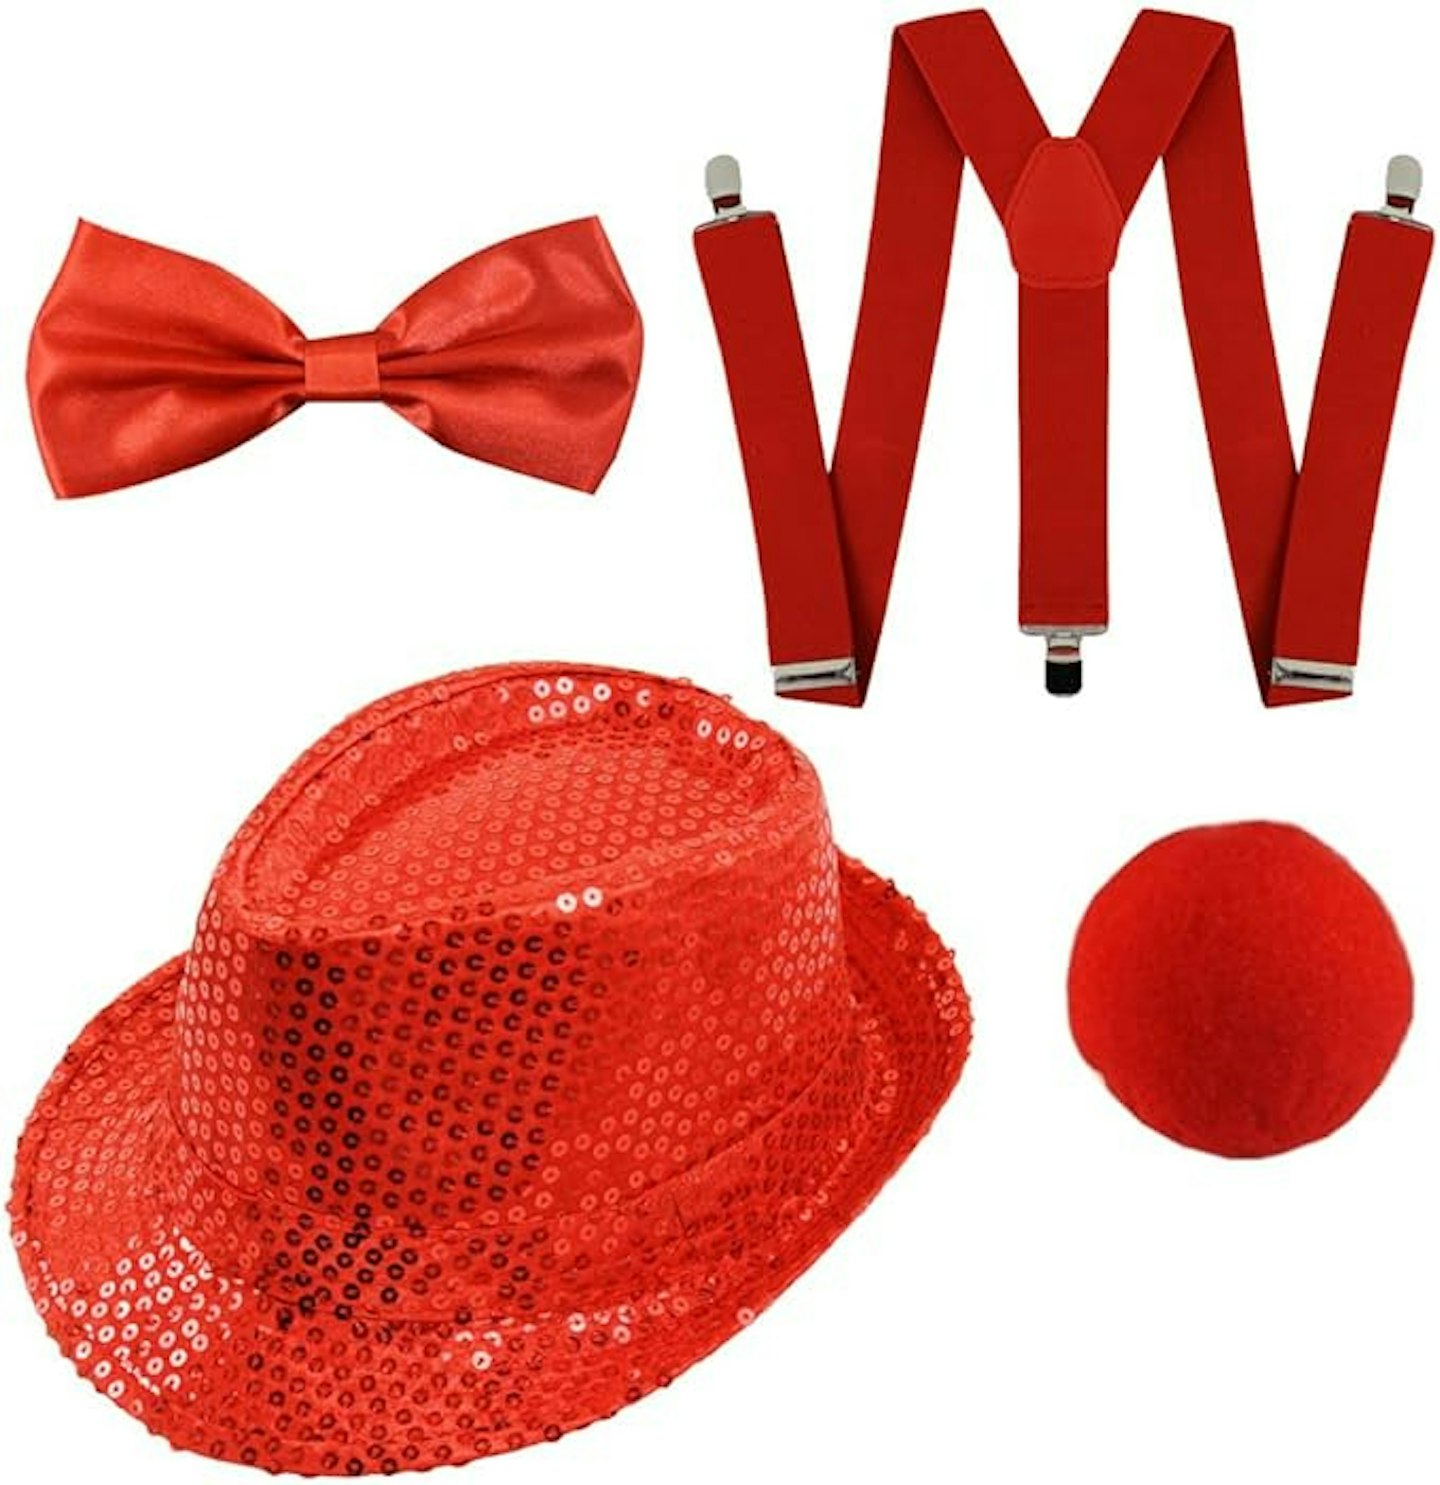 4 PIECE RED NOSE FANCY DRESS COSTUME